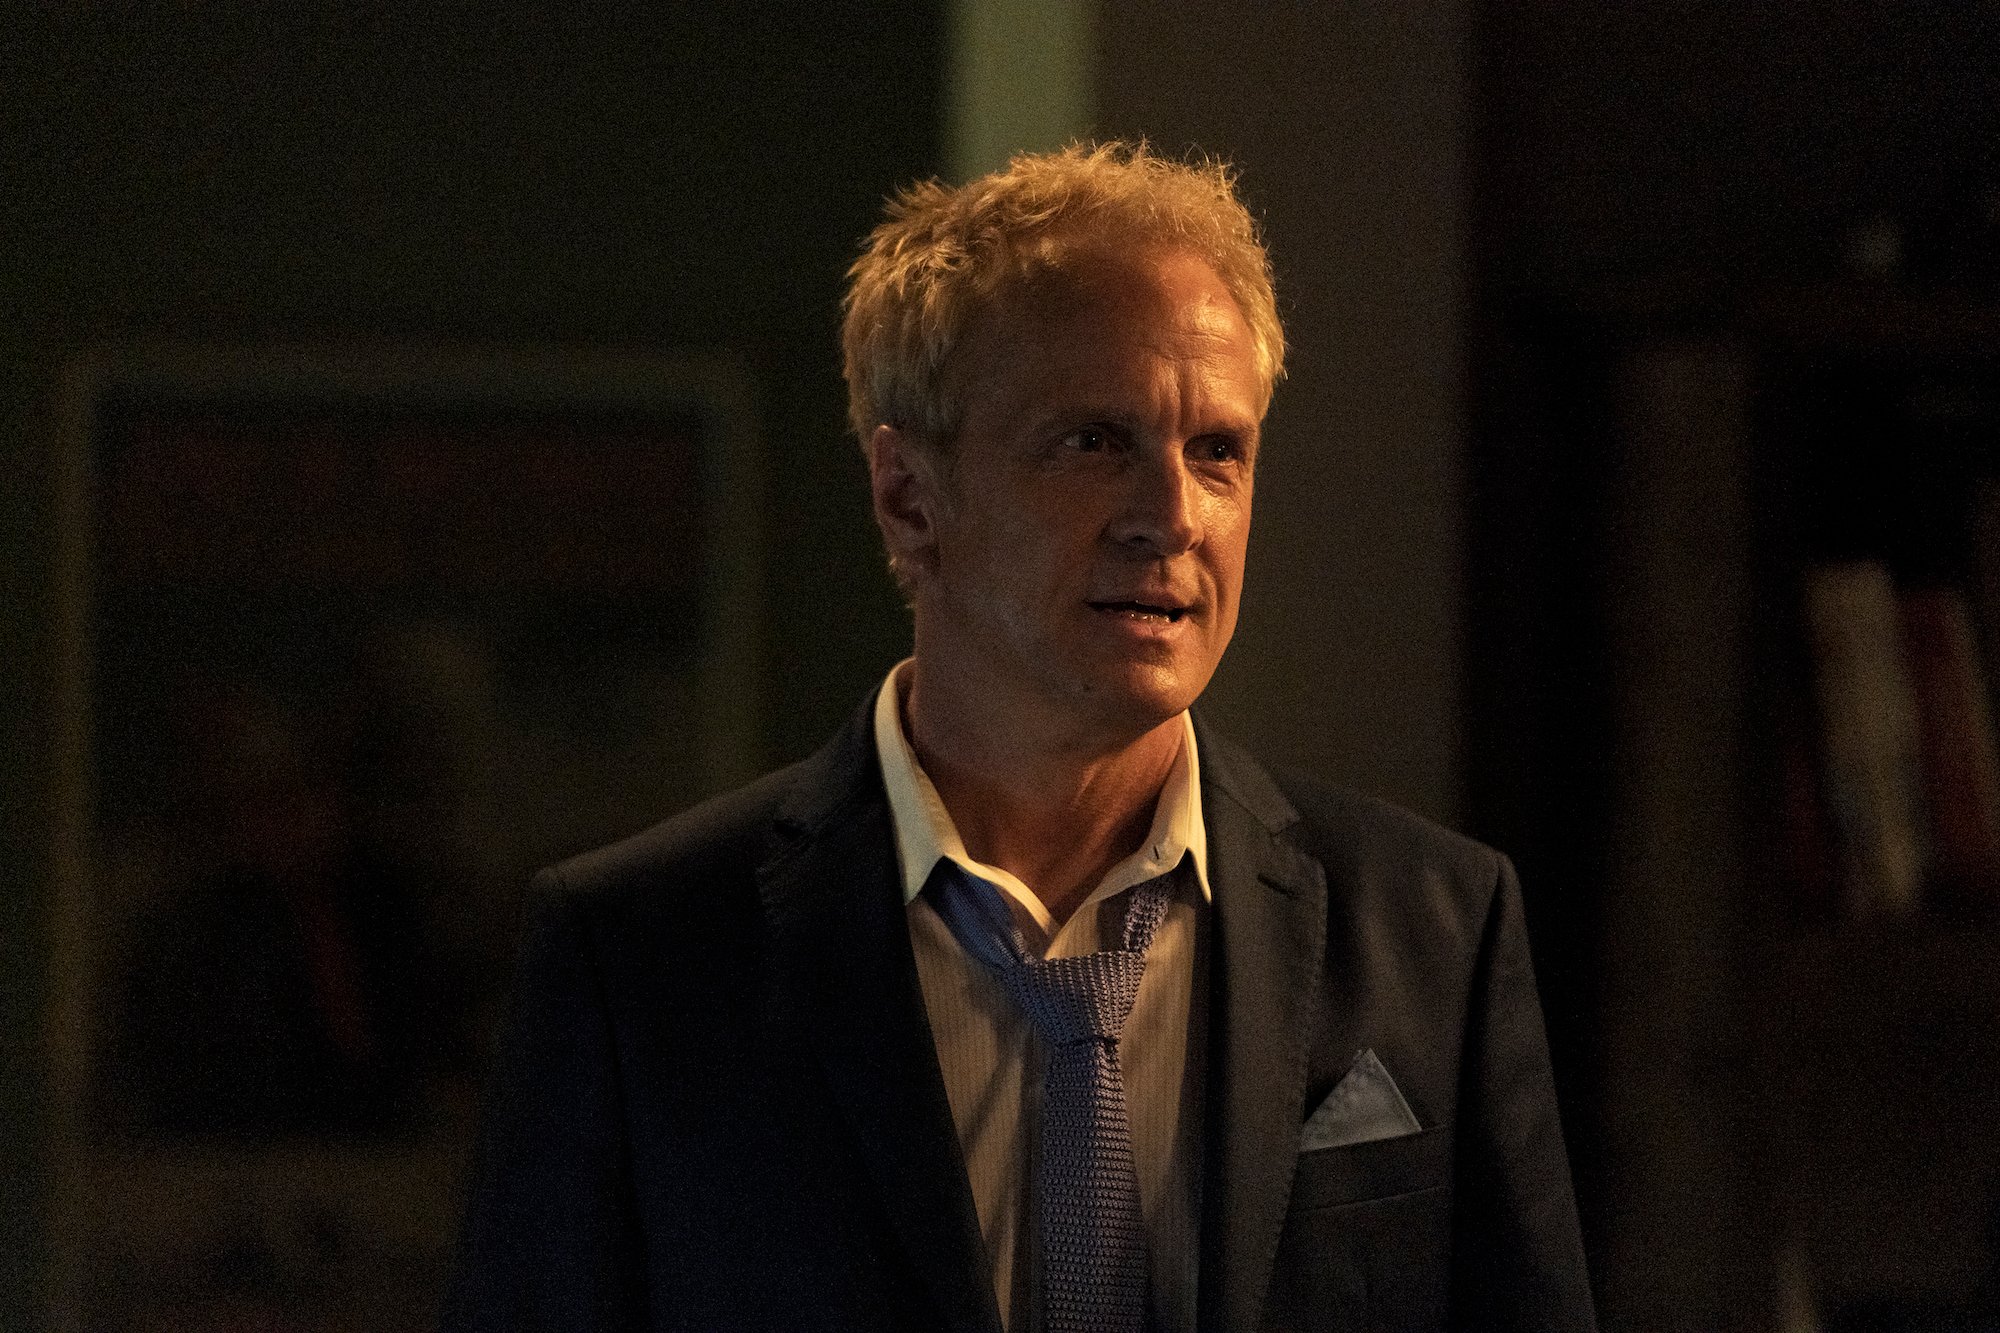 'Better Call Saul' mideason finale: Howard Hamlin (Patrick Fabian) visits Kim and Jimmy, but won't live to see 'Breaking Bad'